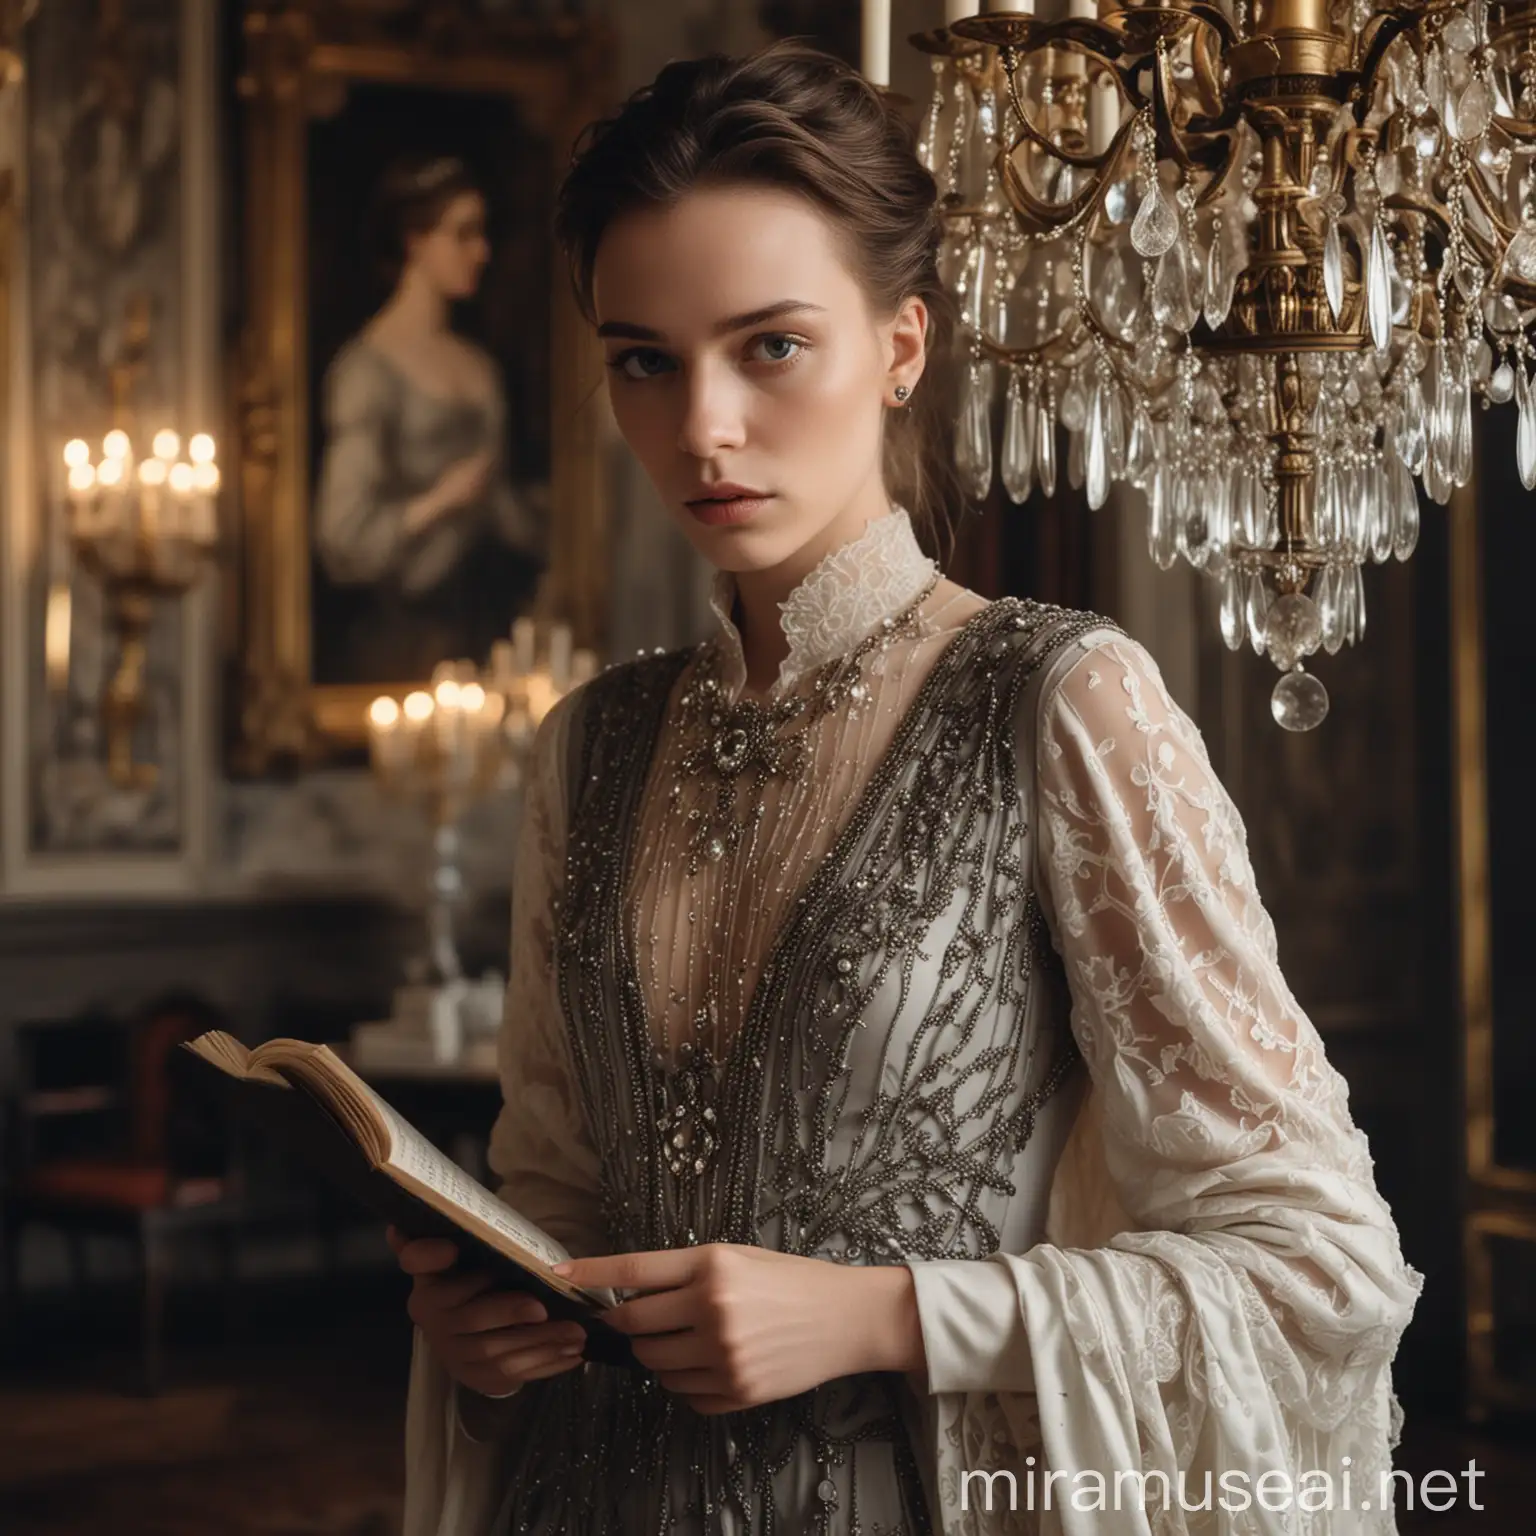 beautiful androgynous human with grey eyes, alexander mcqueen elegant dress, in front of a chandelier, reading tarots